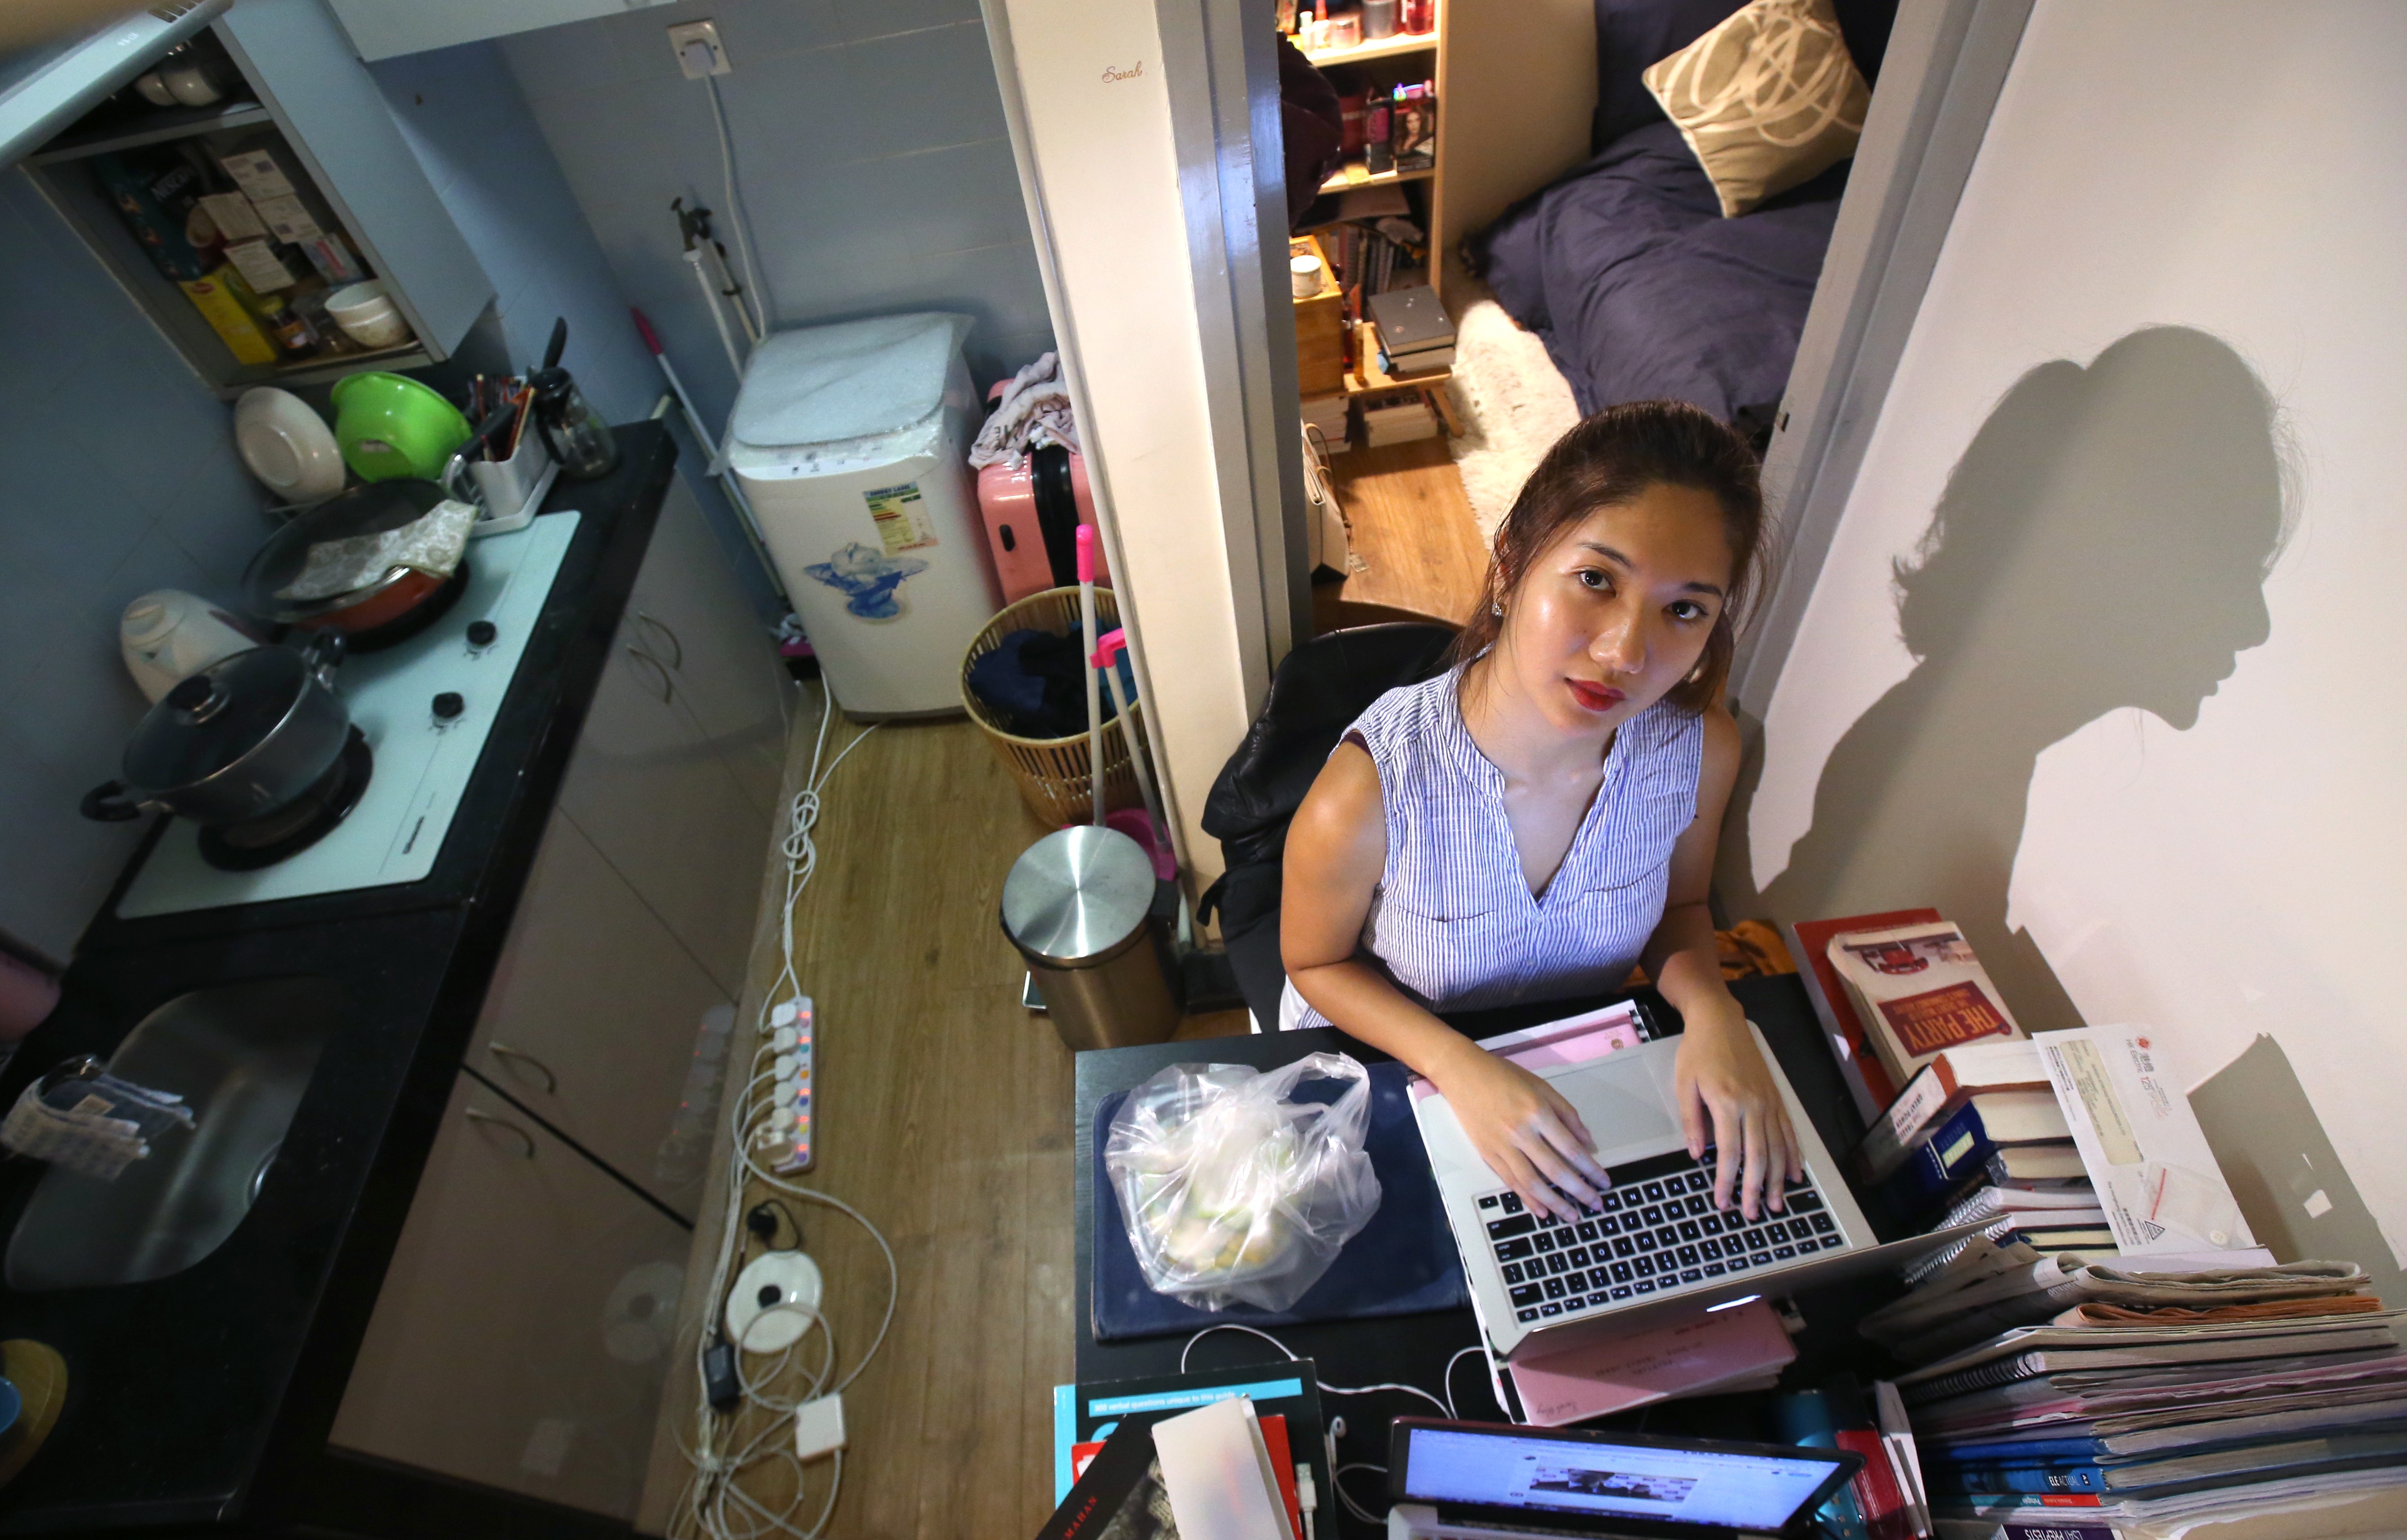 Sarah Wong, then a University of Hong Kong student from Macau, works on her computer in a flat in Sai Ying Pun in October 2017. Wong moved into the apartment with a classmate after she was denied accommodation in the university dorm in the second year of her studies. Photo: David Wong